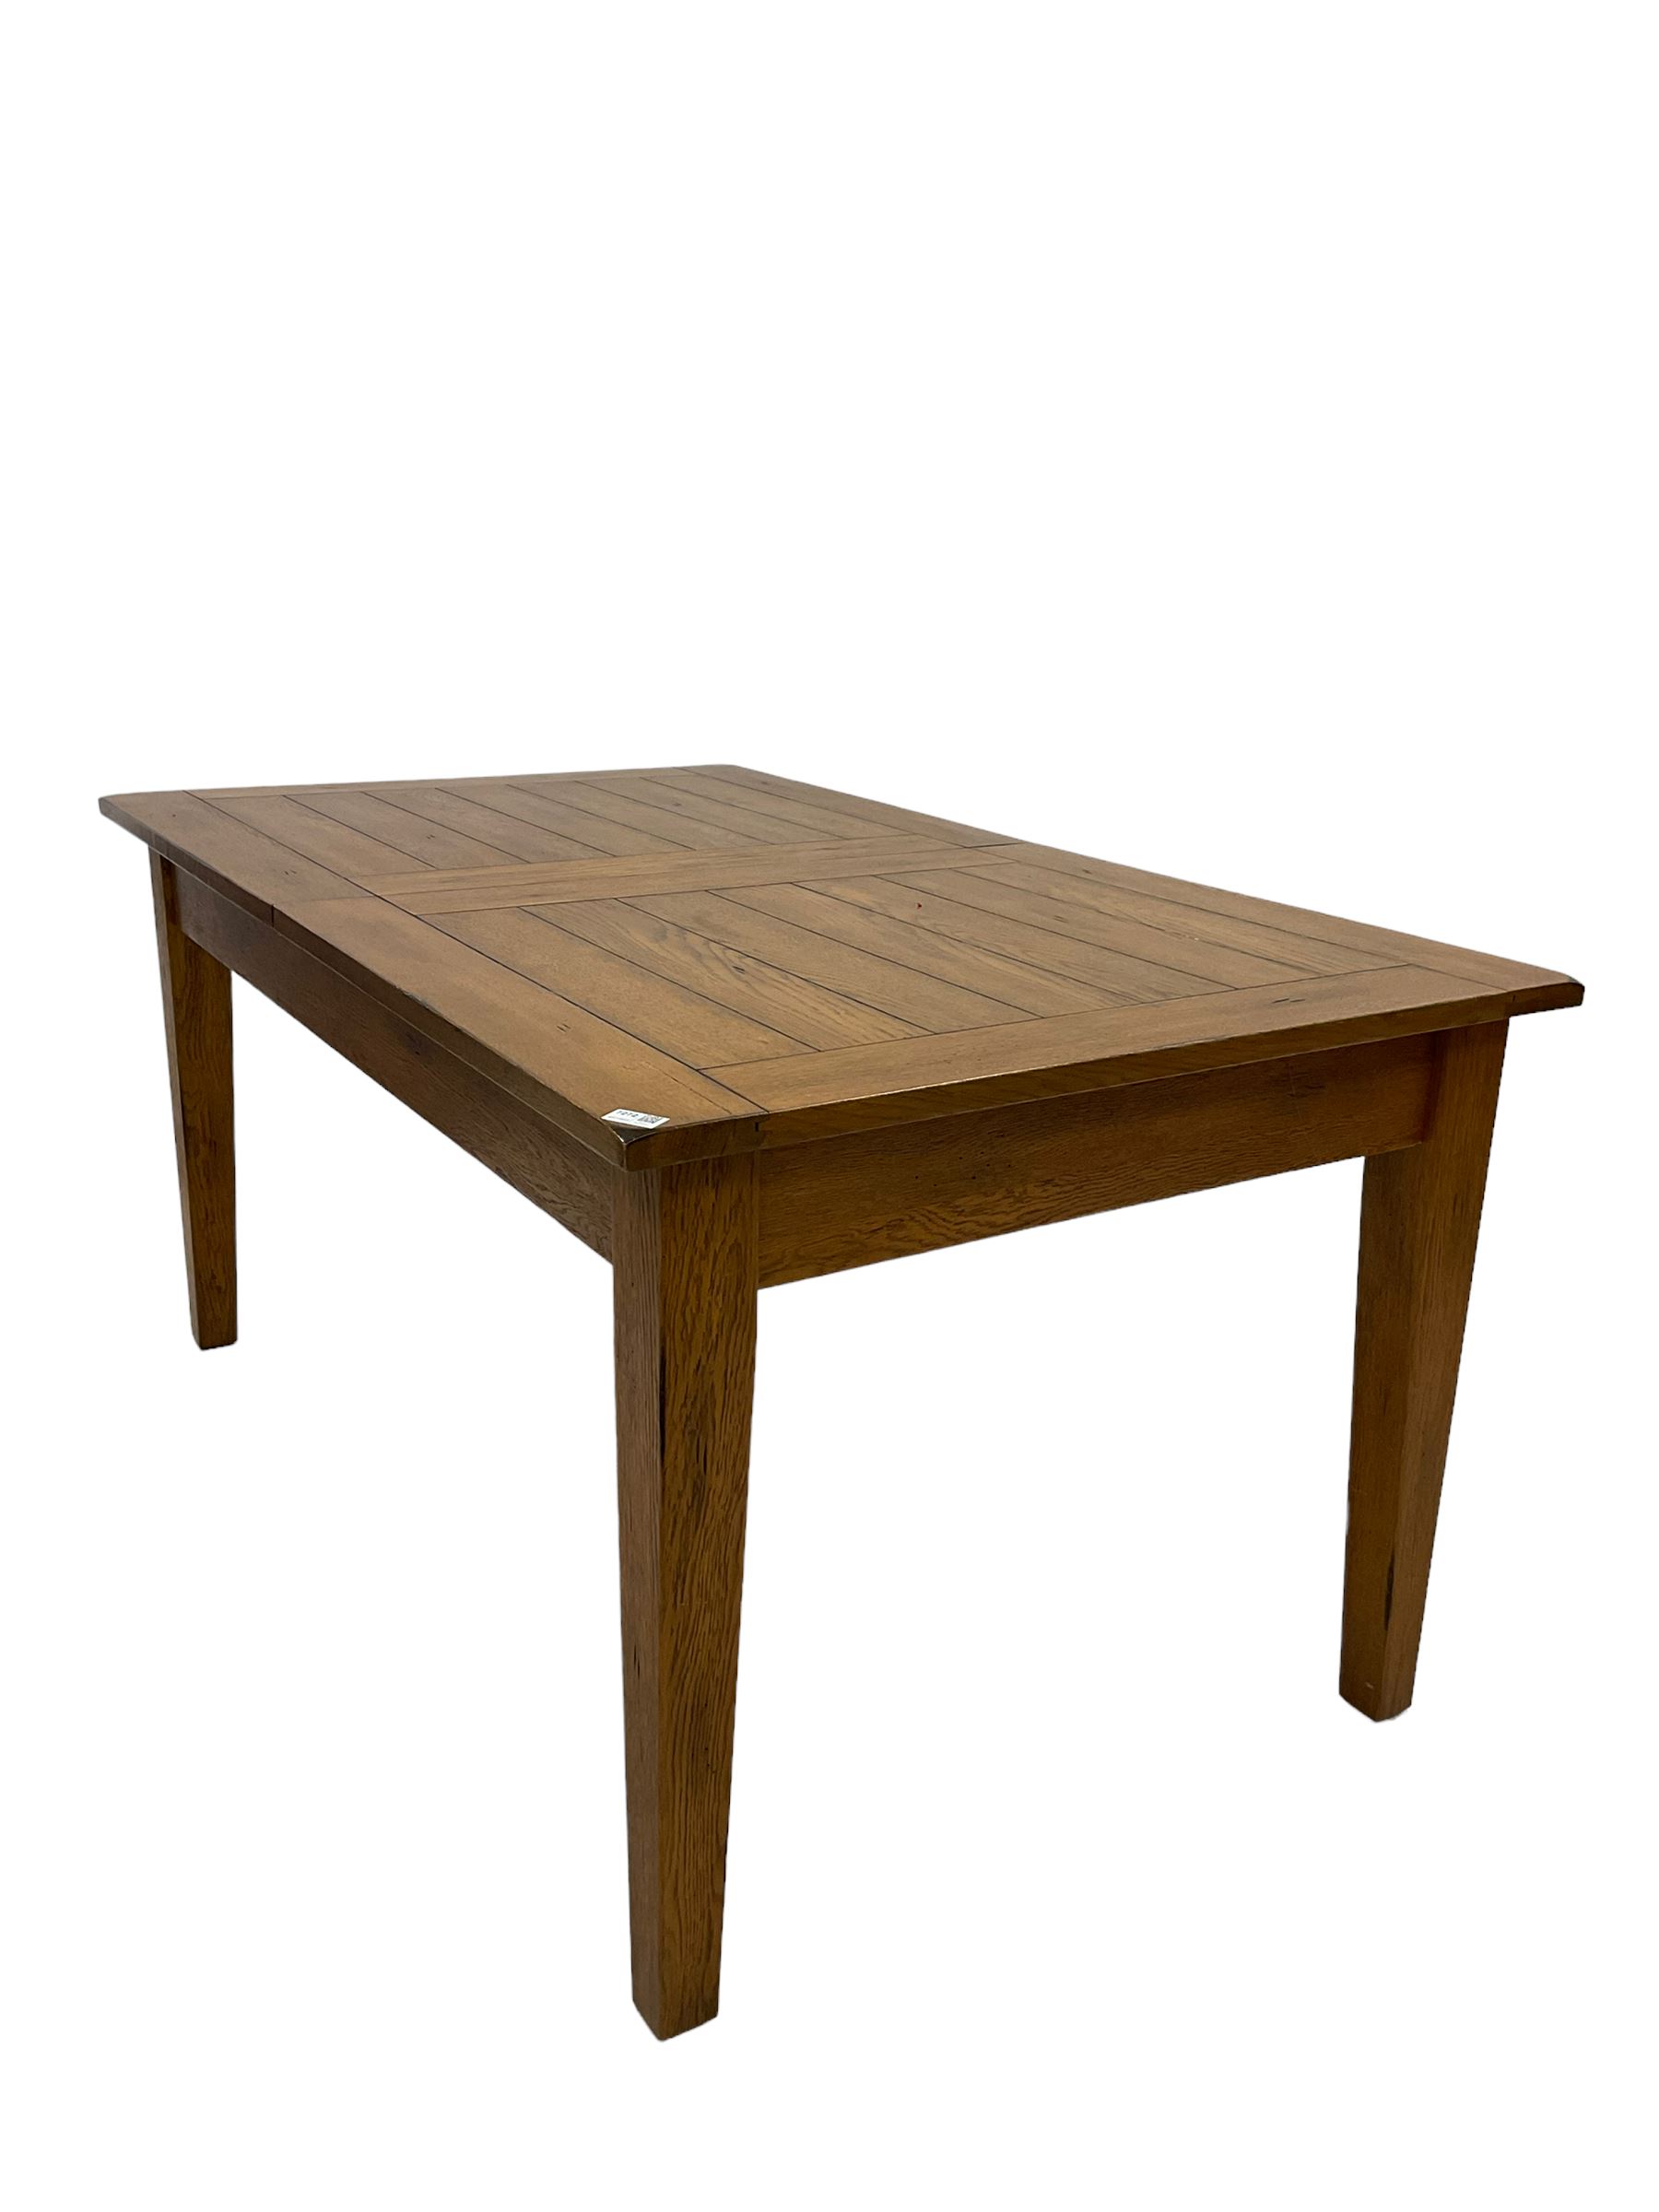 Oak dining table - Image 2 of 5